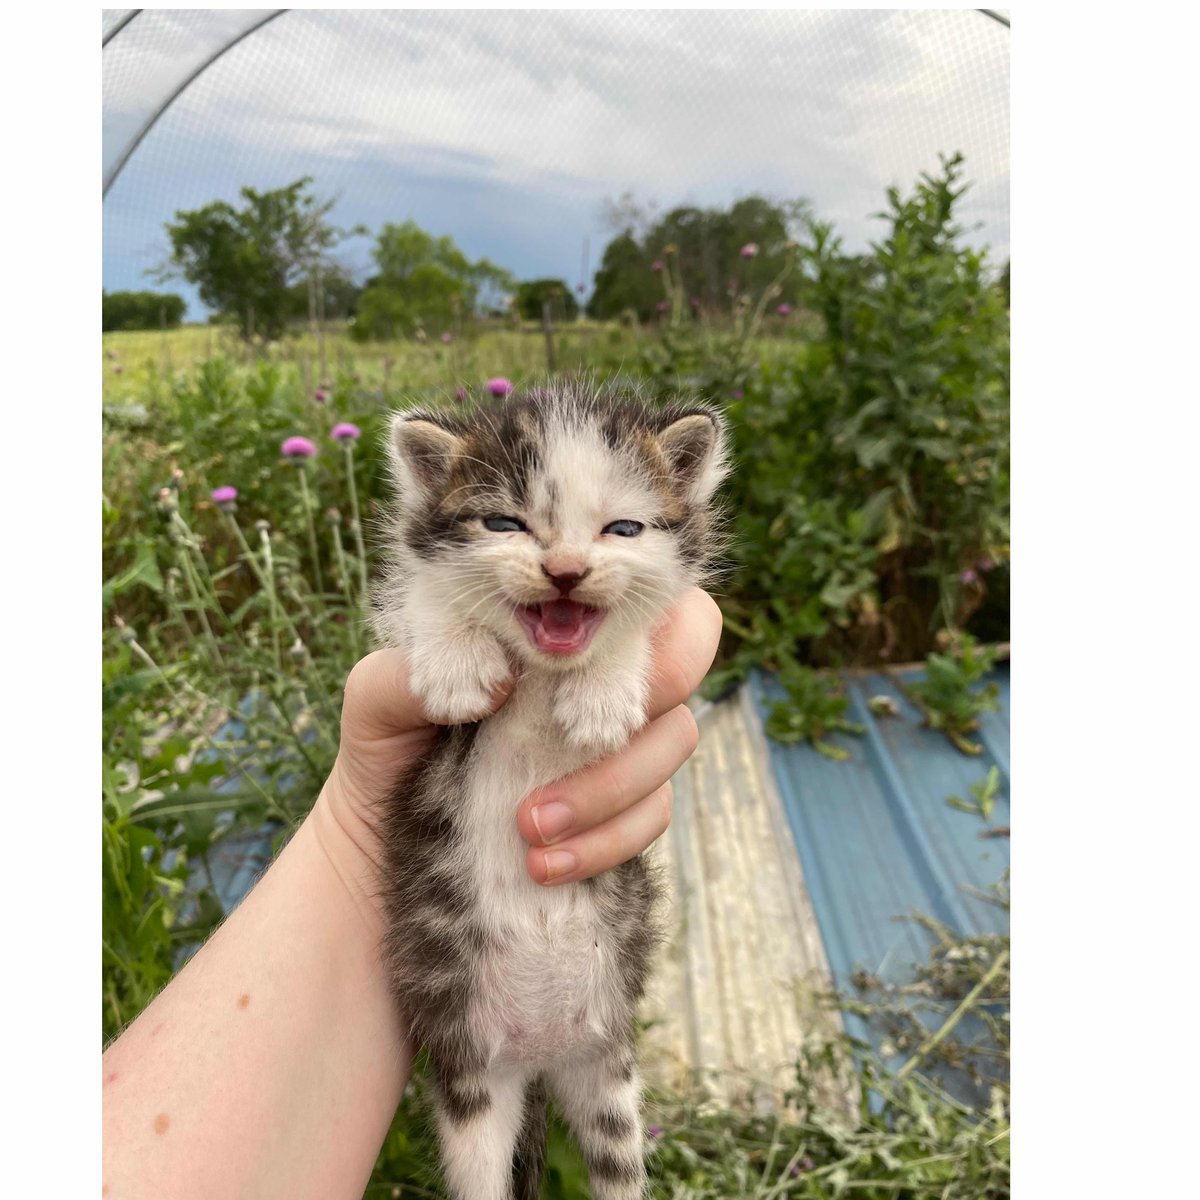 Hi, I'm Thistle!
I'm a paralyzed 2-week-old kitten who was found in a thorny bush and could use your help to get big and strong 💪

Click here to send me some 🩷: bit.ly/3V3lezM

#cats #kitten #catsoftwitter #kittenrescue